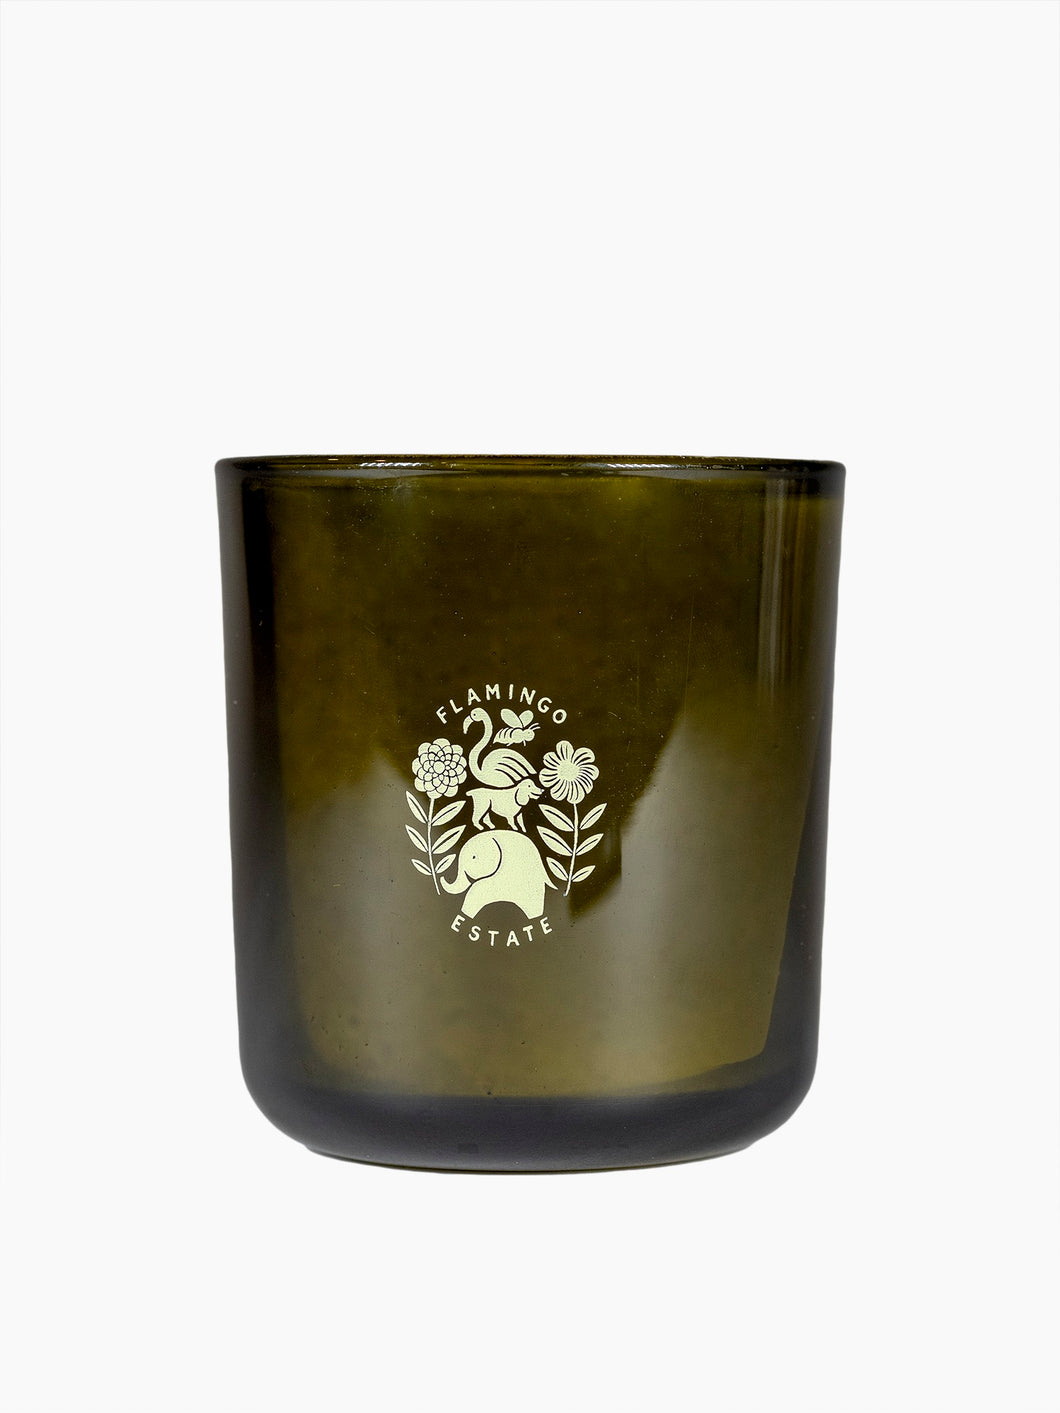 Adriatic Muscatel Sage Candle